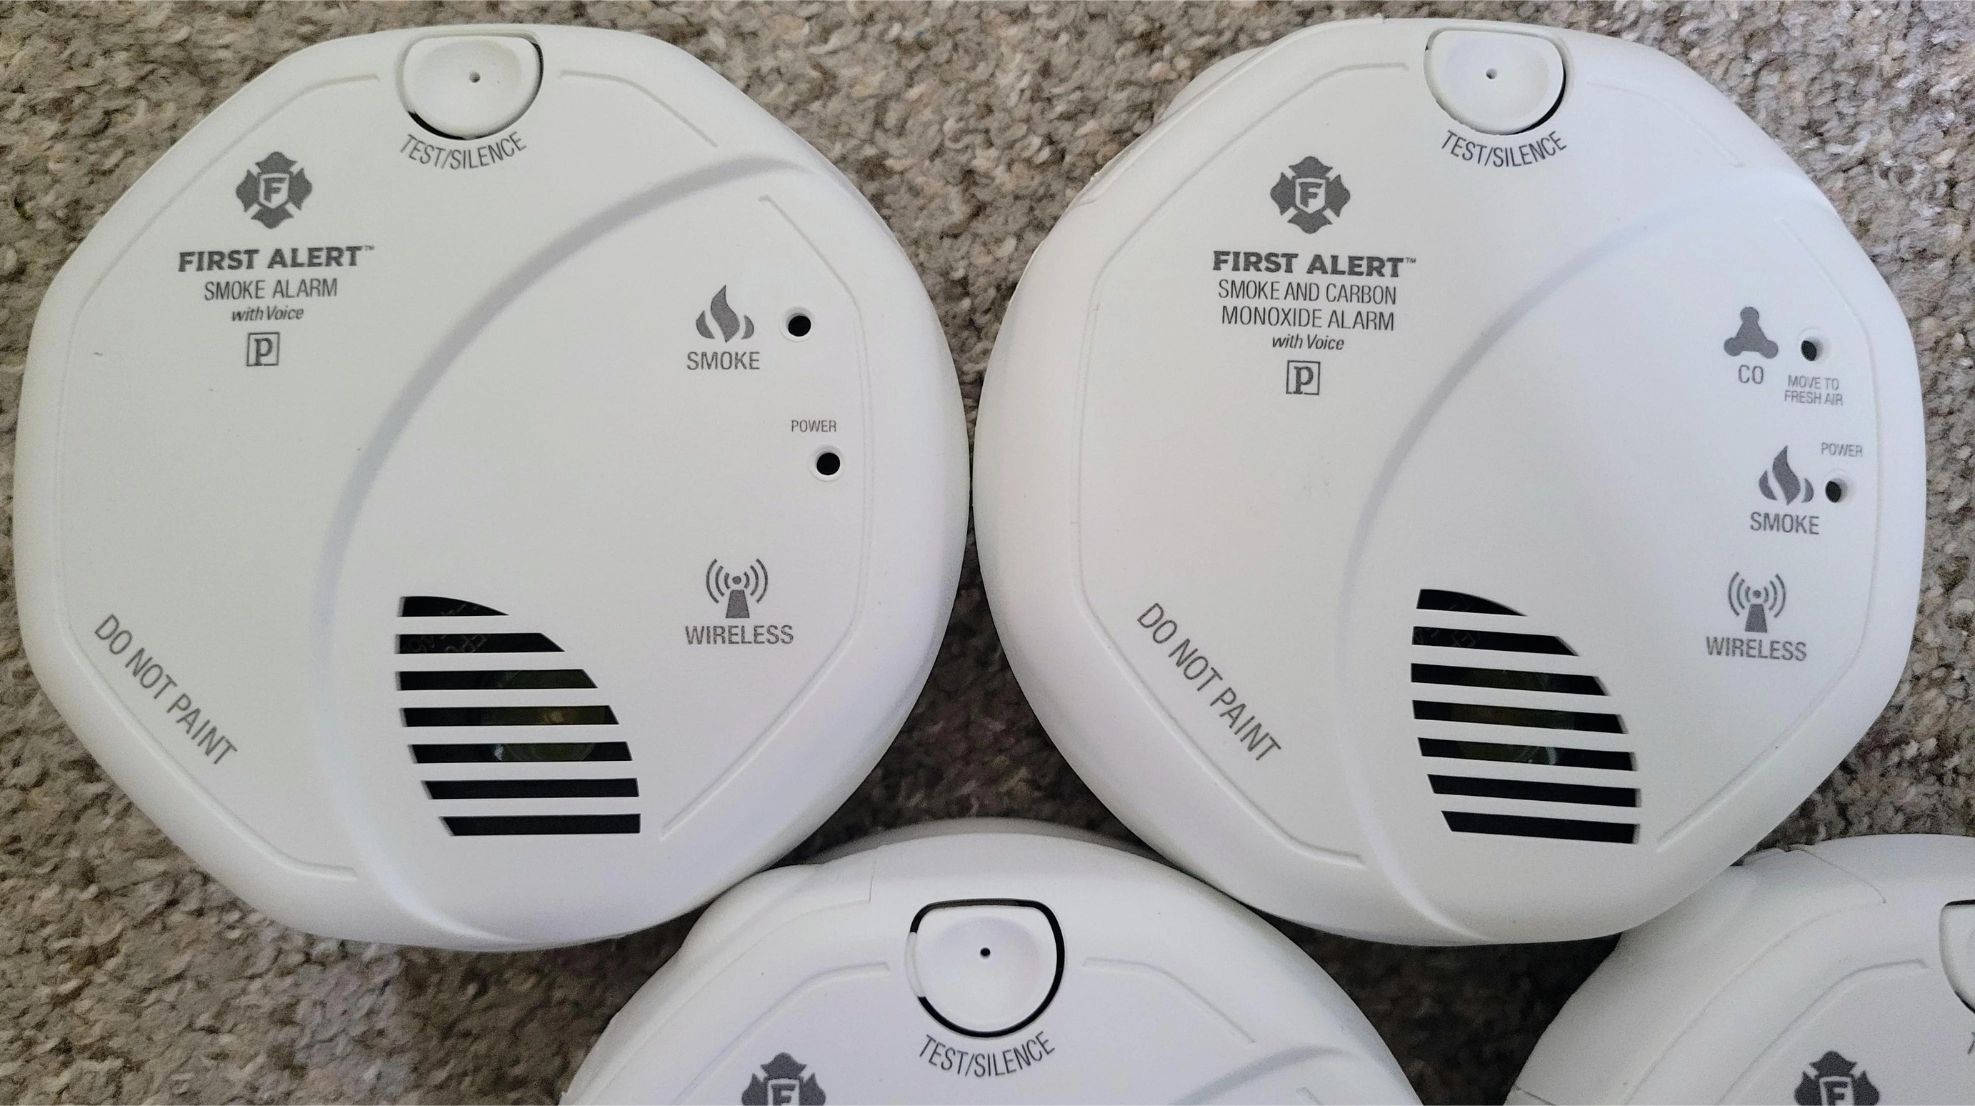 How To Stop A First Alert Smoke Detector From Beeping